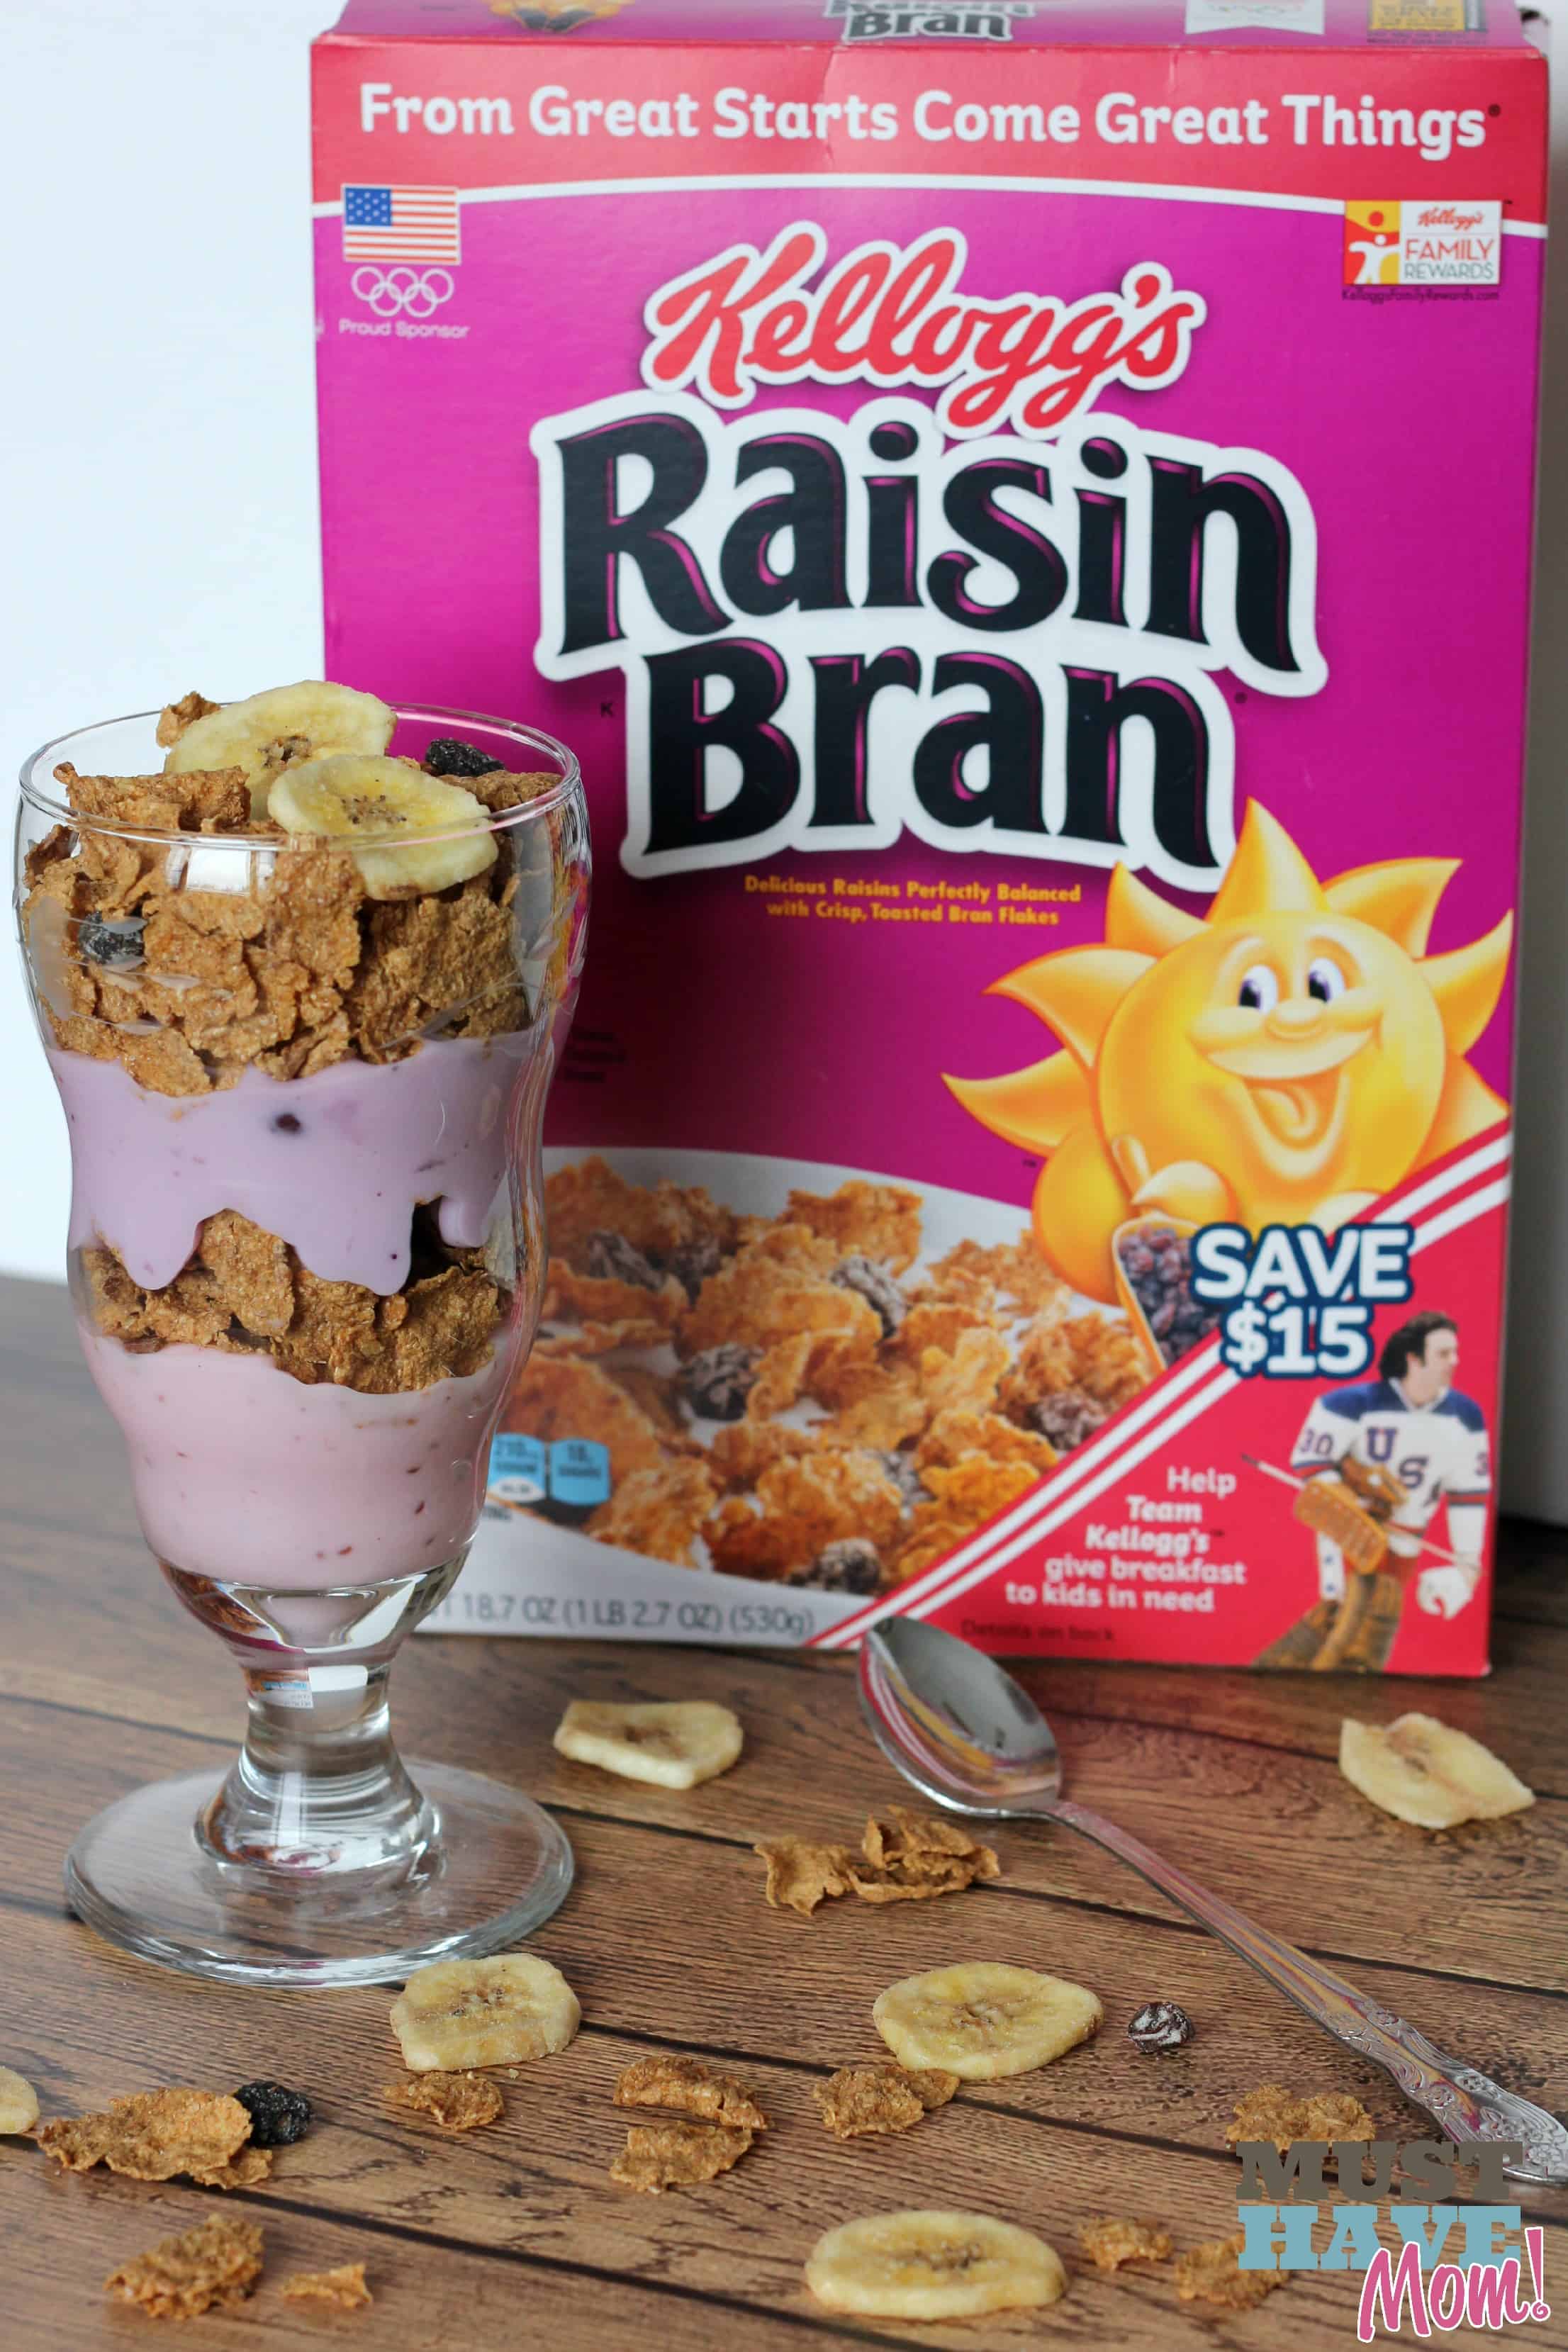 Surprising Snack Pairings With Kellogg’s Cereal ~ Great Snack Ideas!